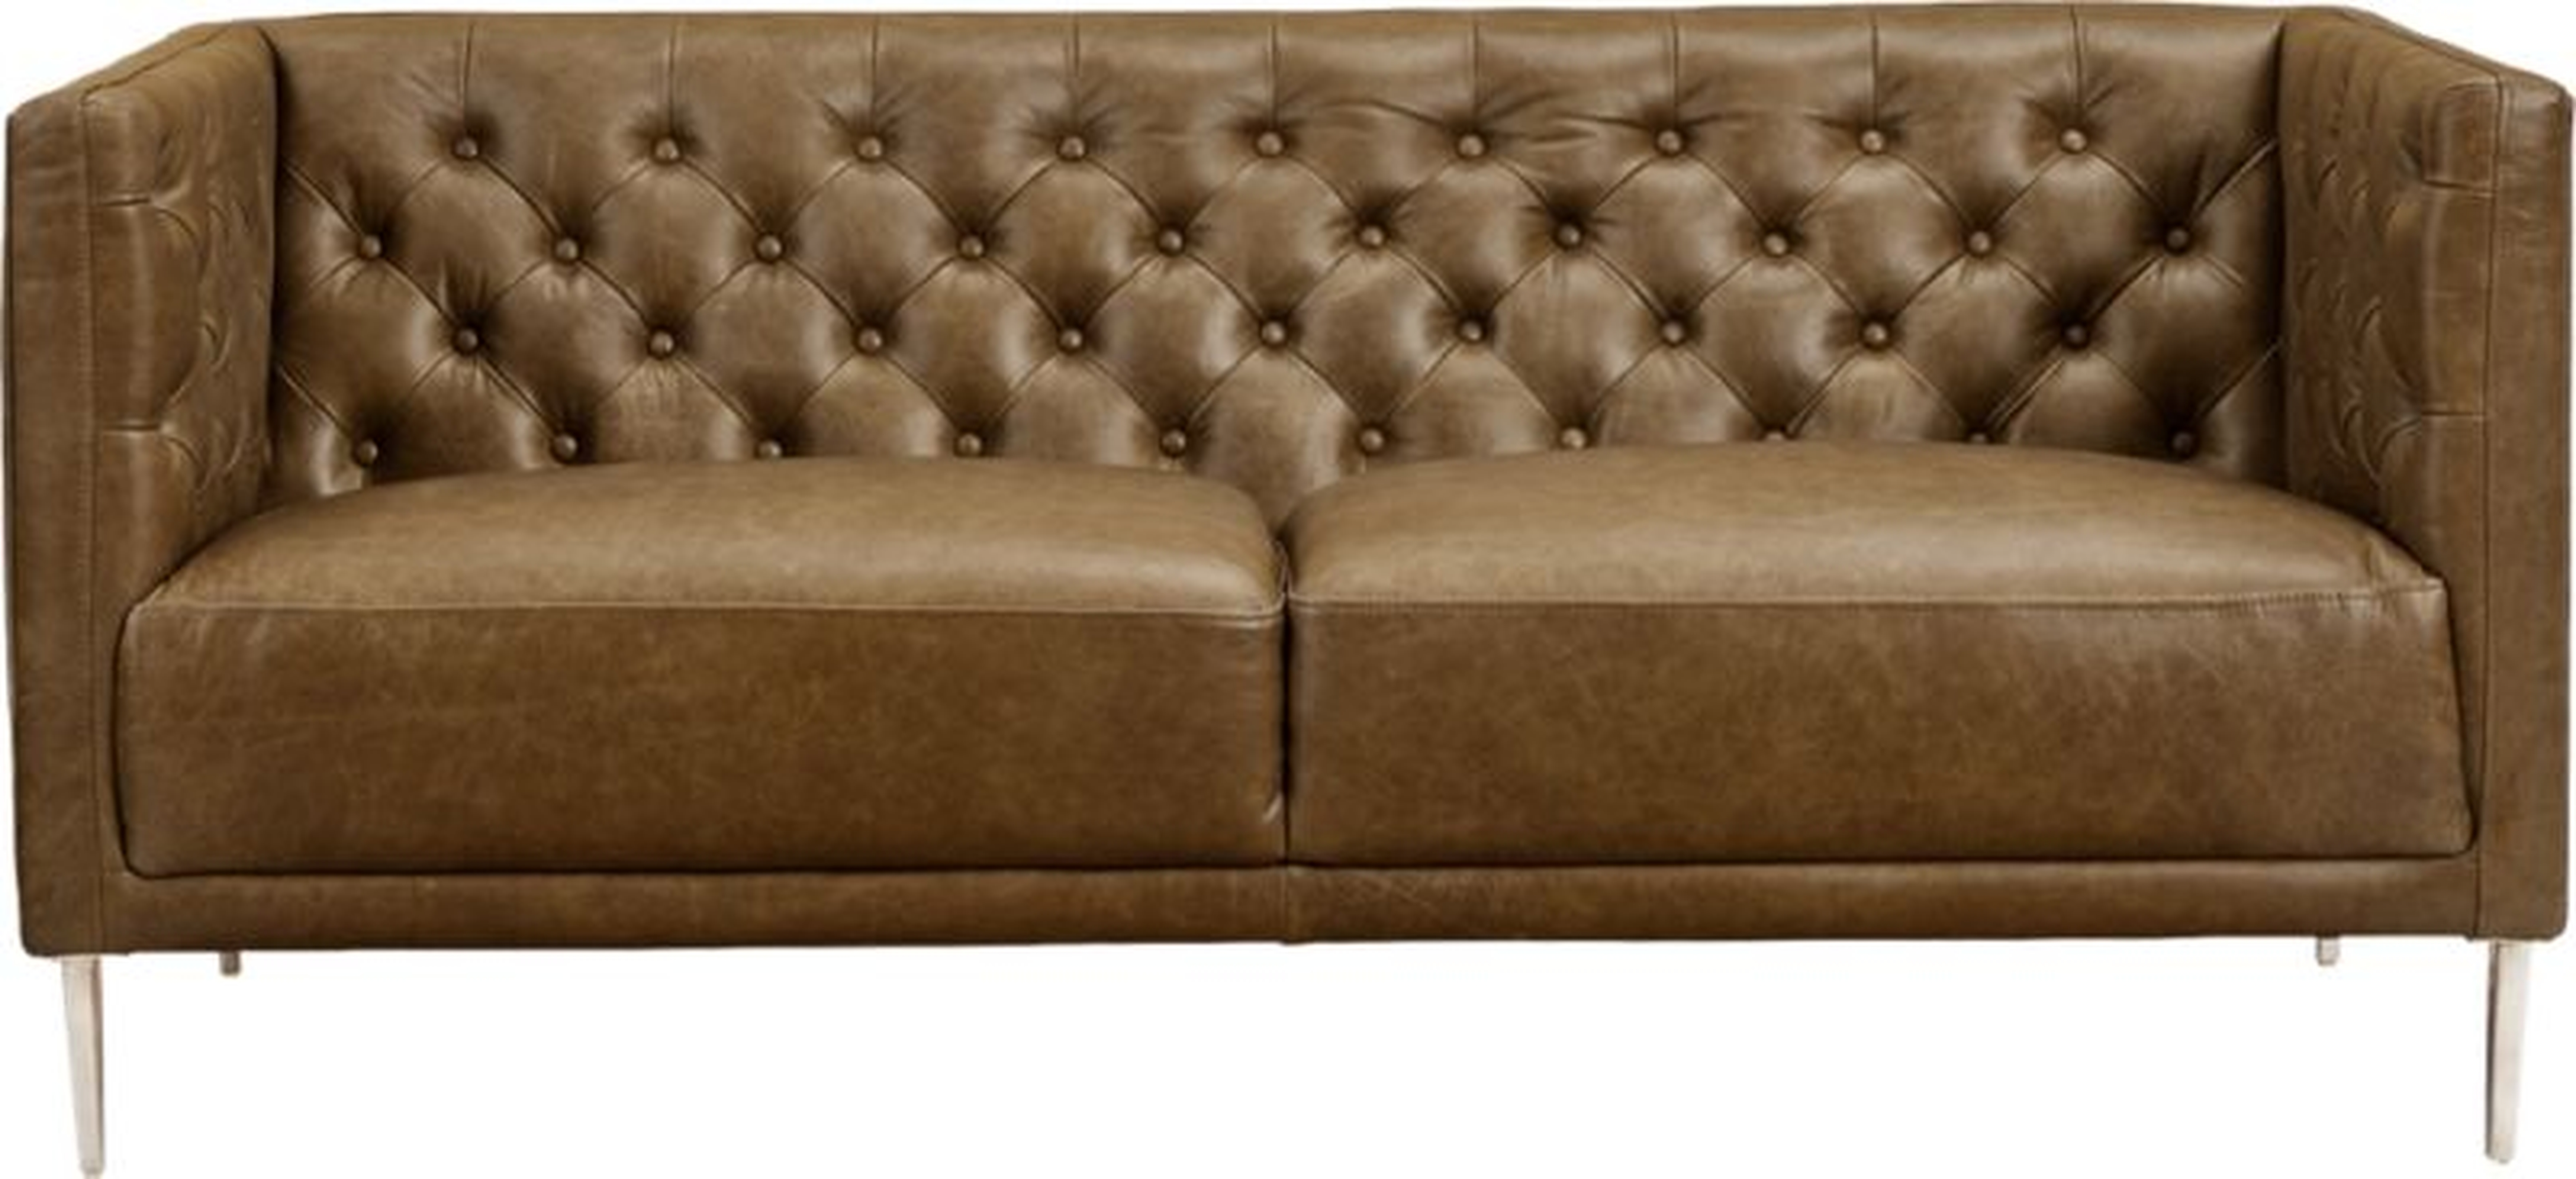 Savile Saddle Leather Tufted Apartment Sofa // Estimated in early August - CB2